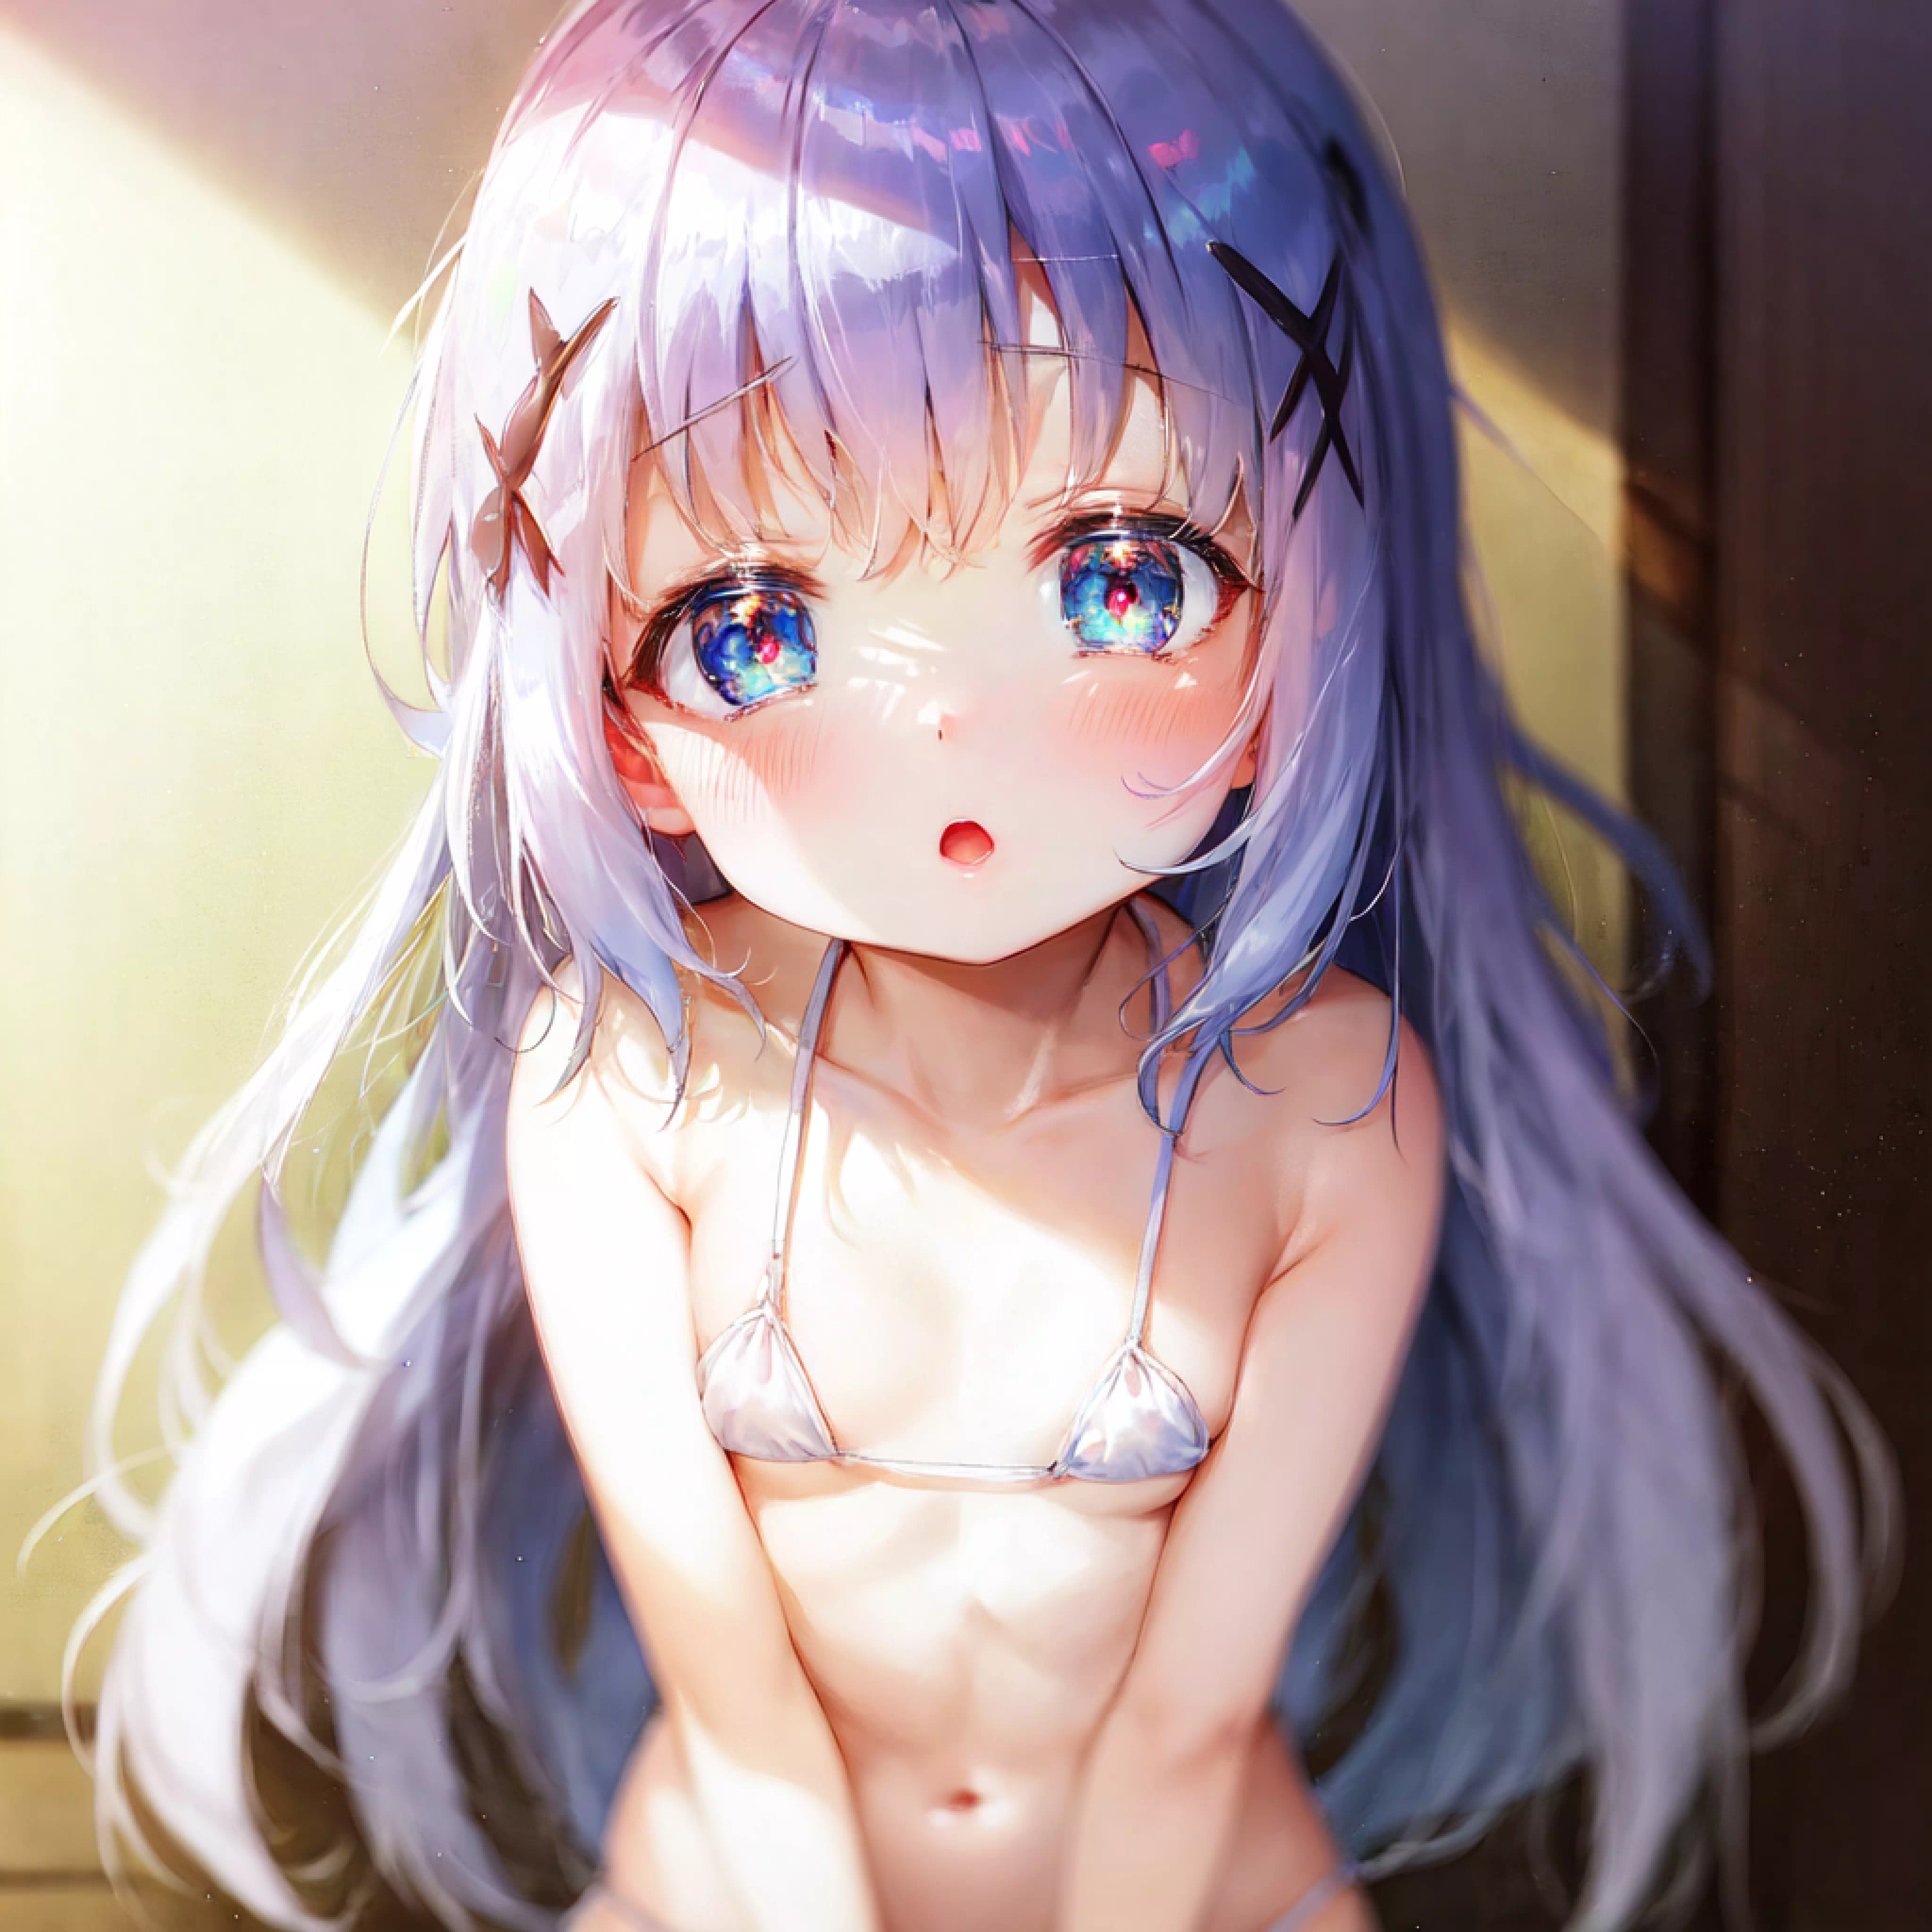 Sex with Chino